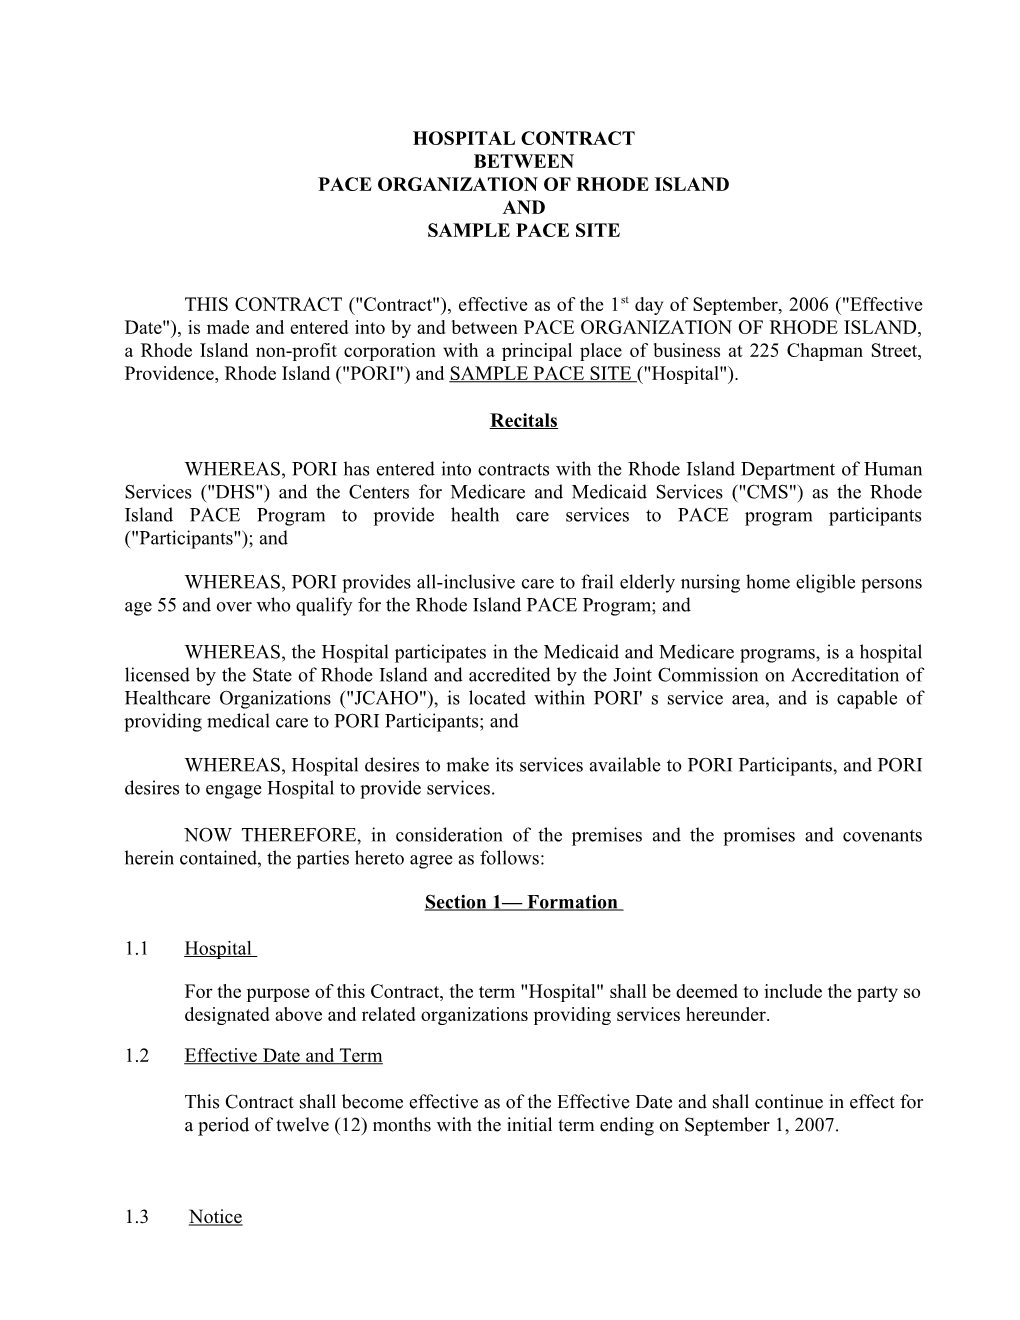 Hospital Contract Between Pace Organization of Rhode Island and Sample Pace Site